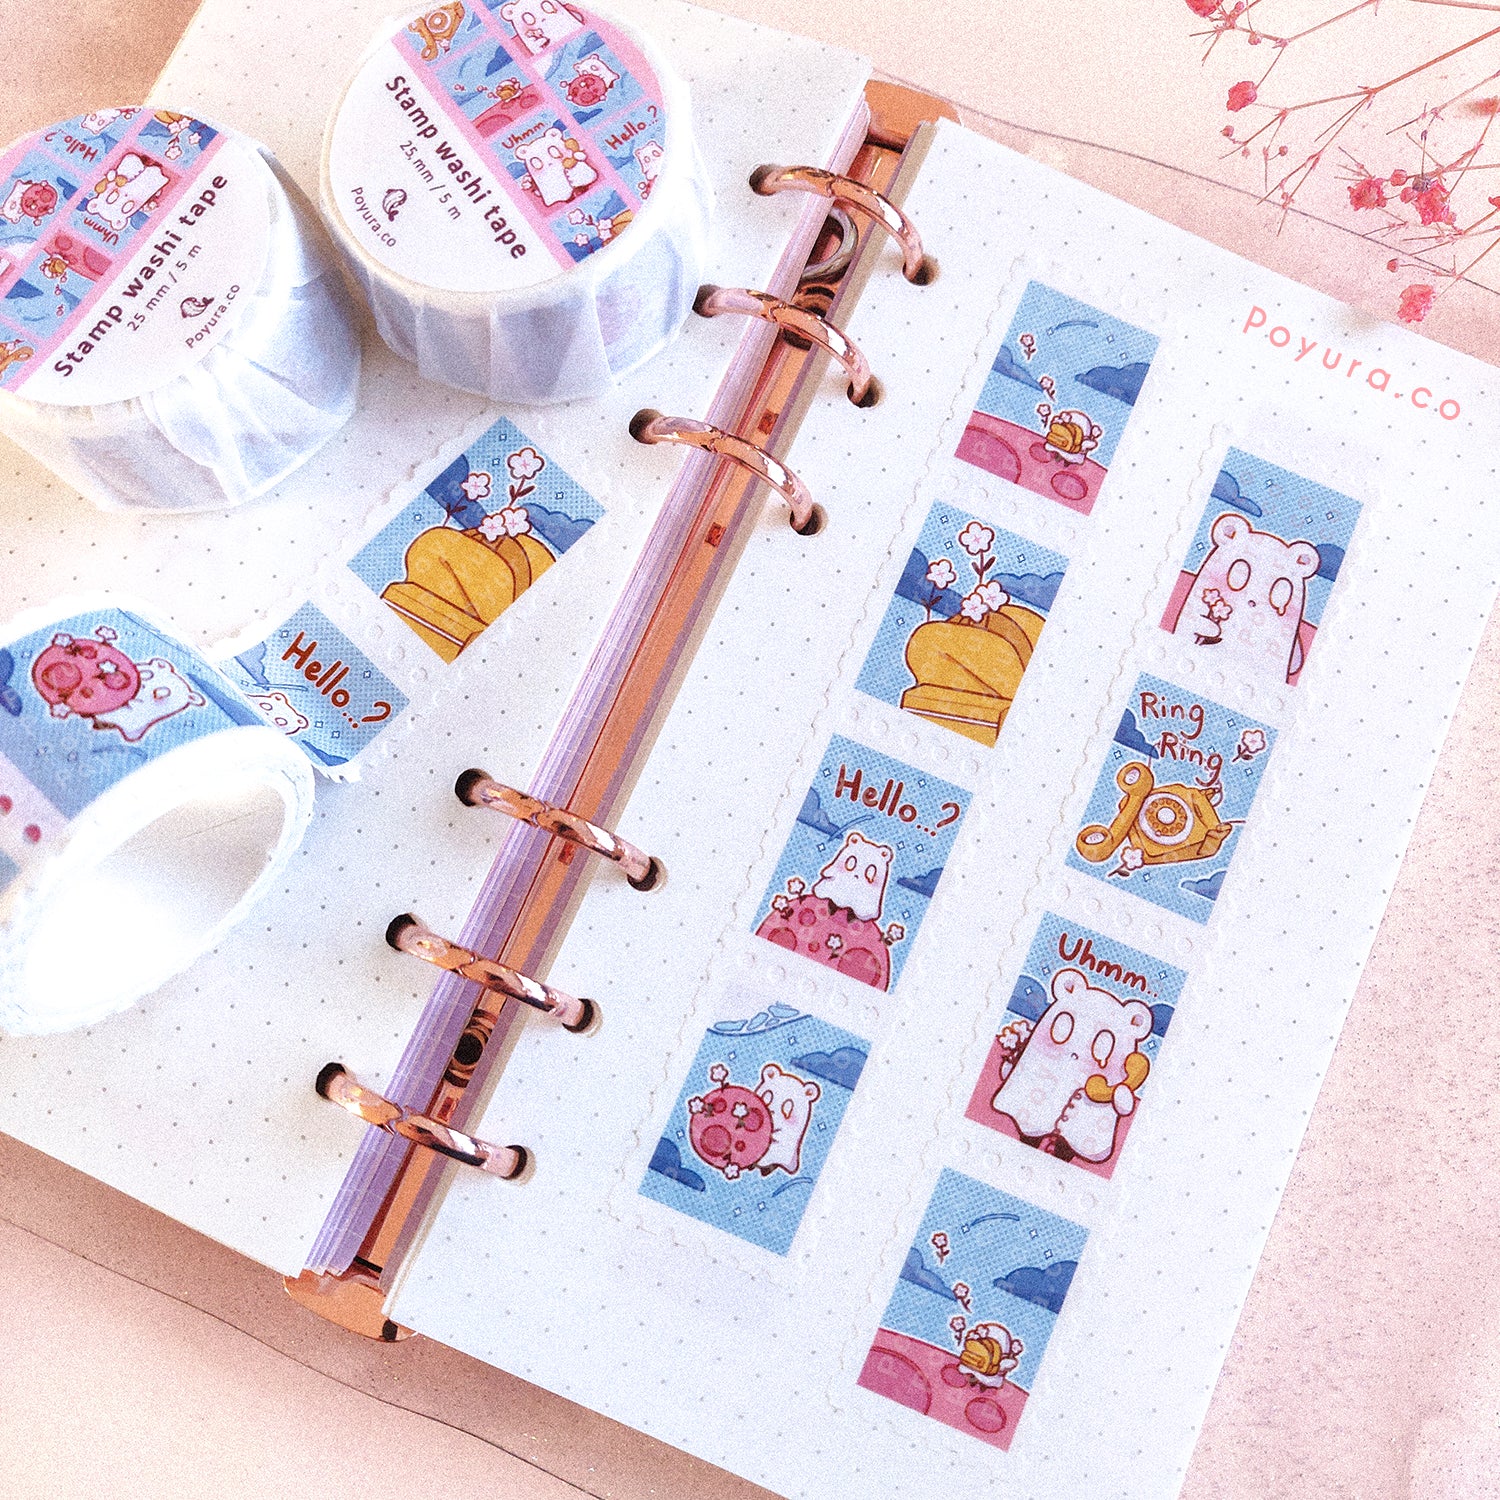 Valentine ghosting space planet moon star flower floral heart love deco tiny small orange food luck aesthetic cute polco kpop journal toploader sticker stamp washi tape